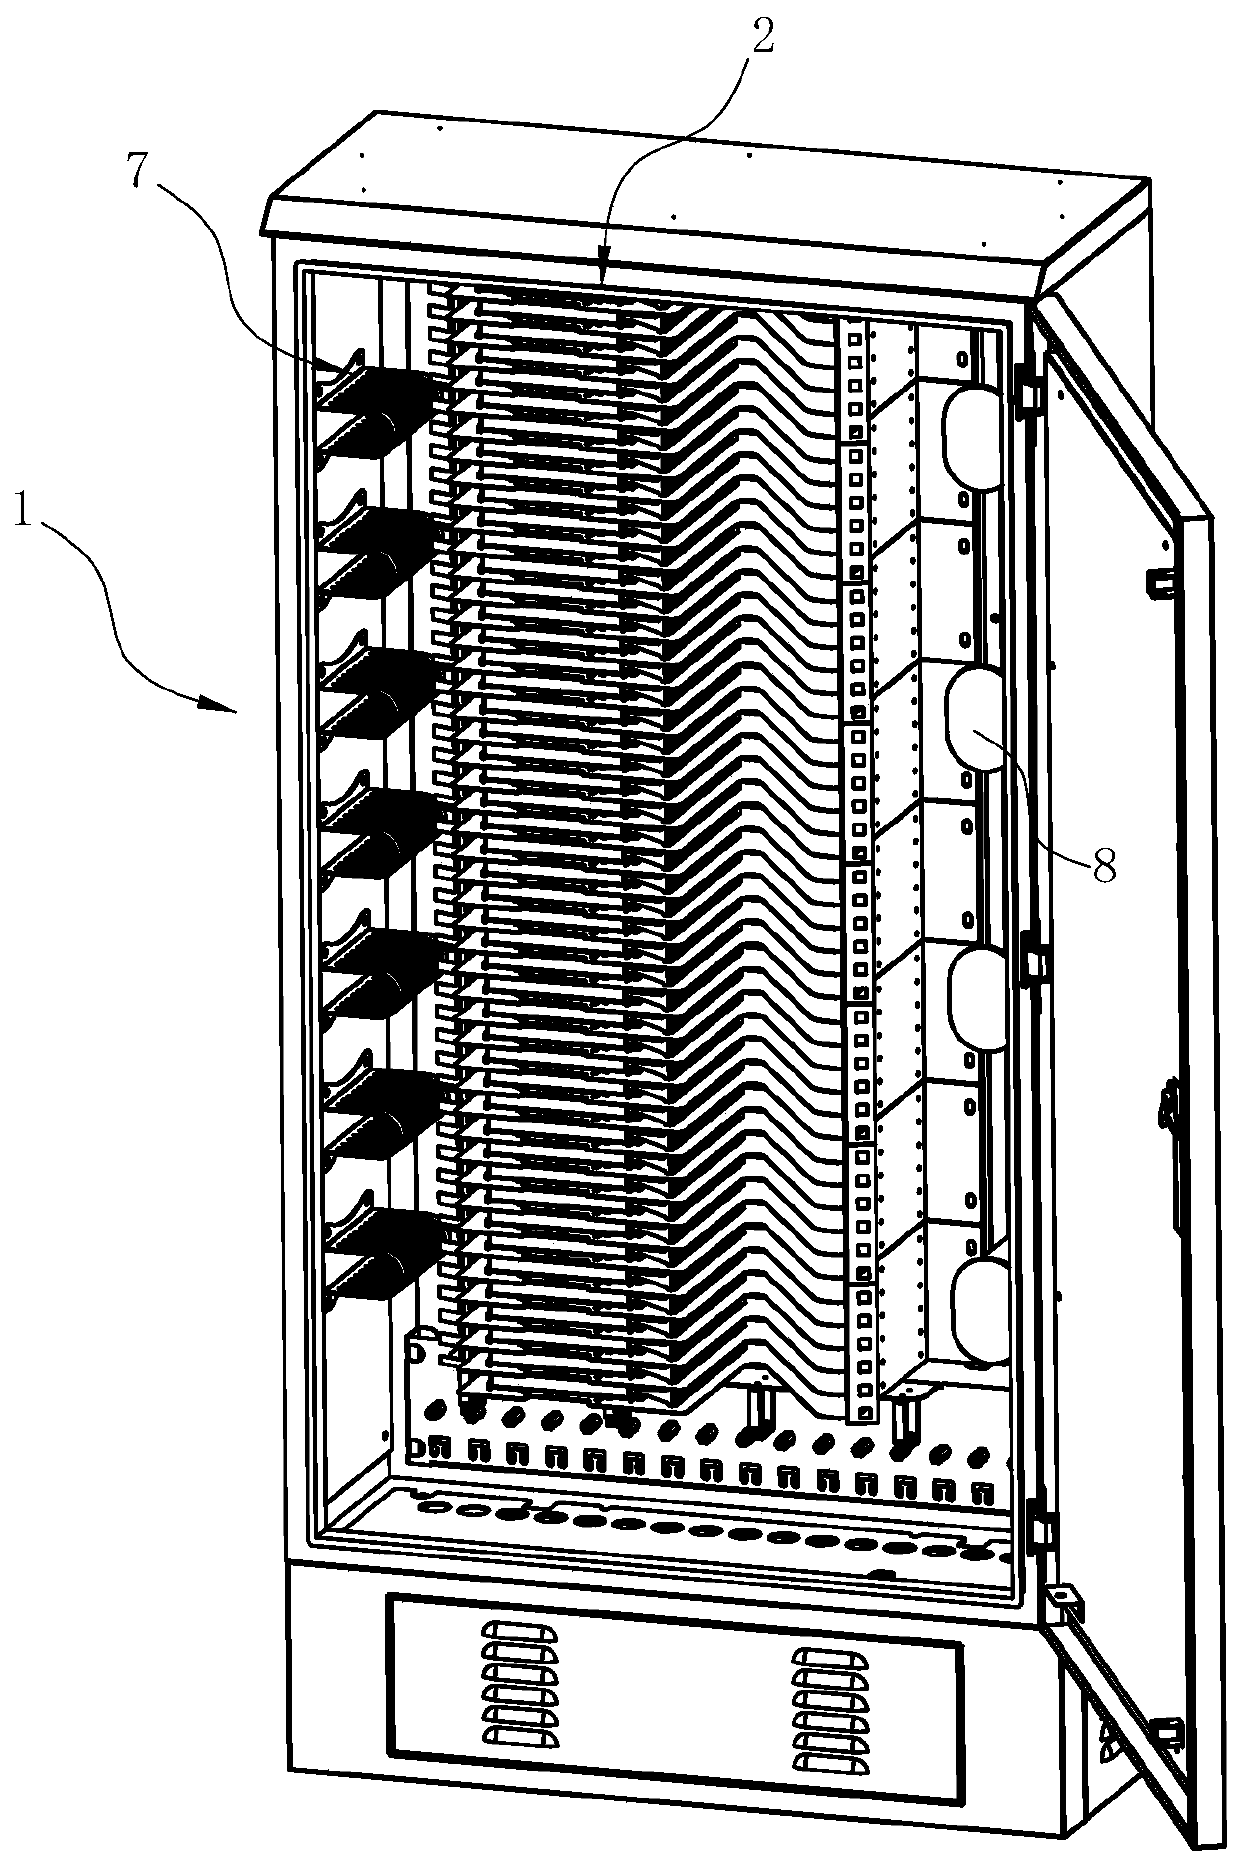 High-density cross connecting cabinet